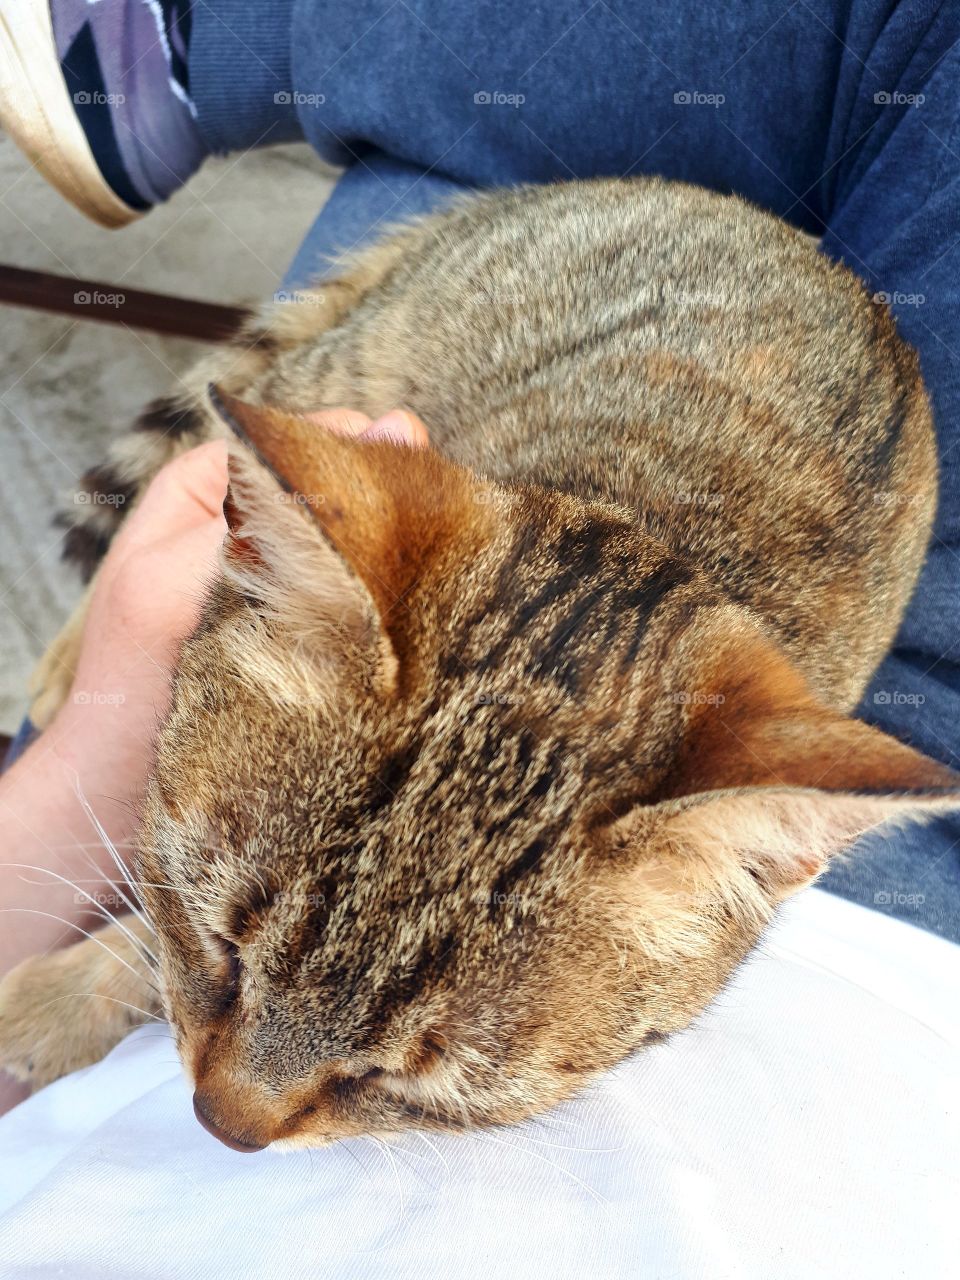 This is now my family cat.She still have no name, because it came a few days ago with us while we were working in the field.She is very dear.We thought it was our old cat because it was the same, but it did not.The likes of caressing and enjoying it